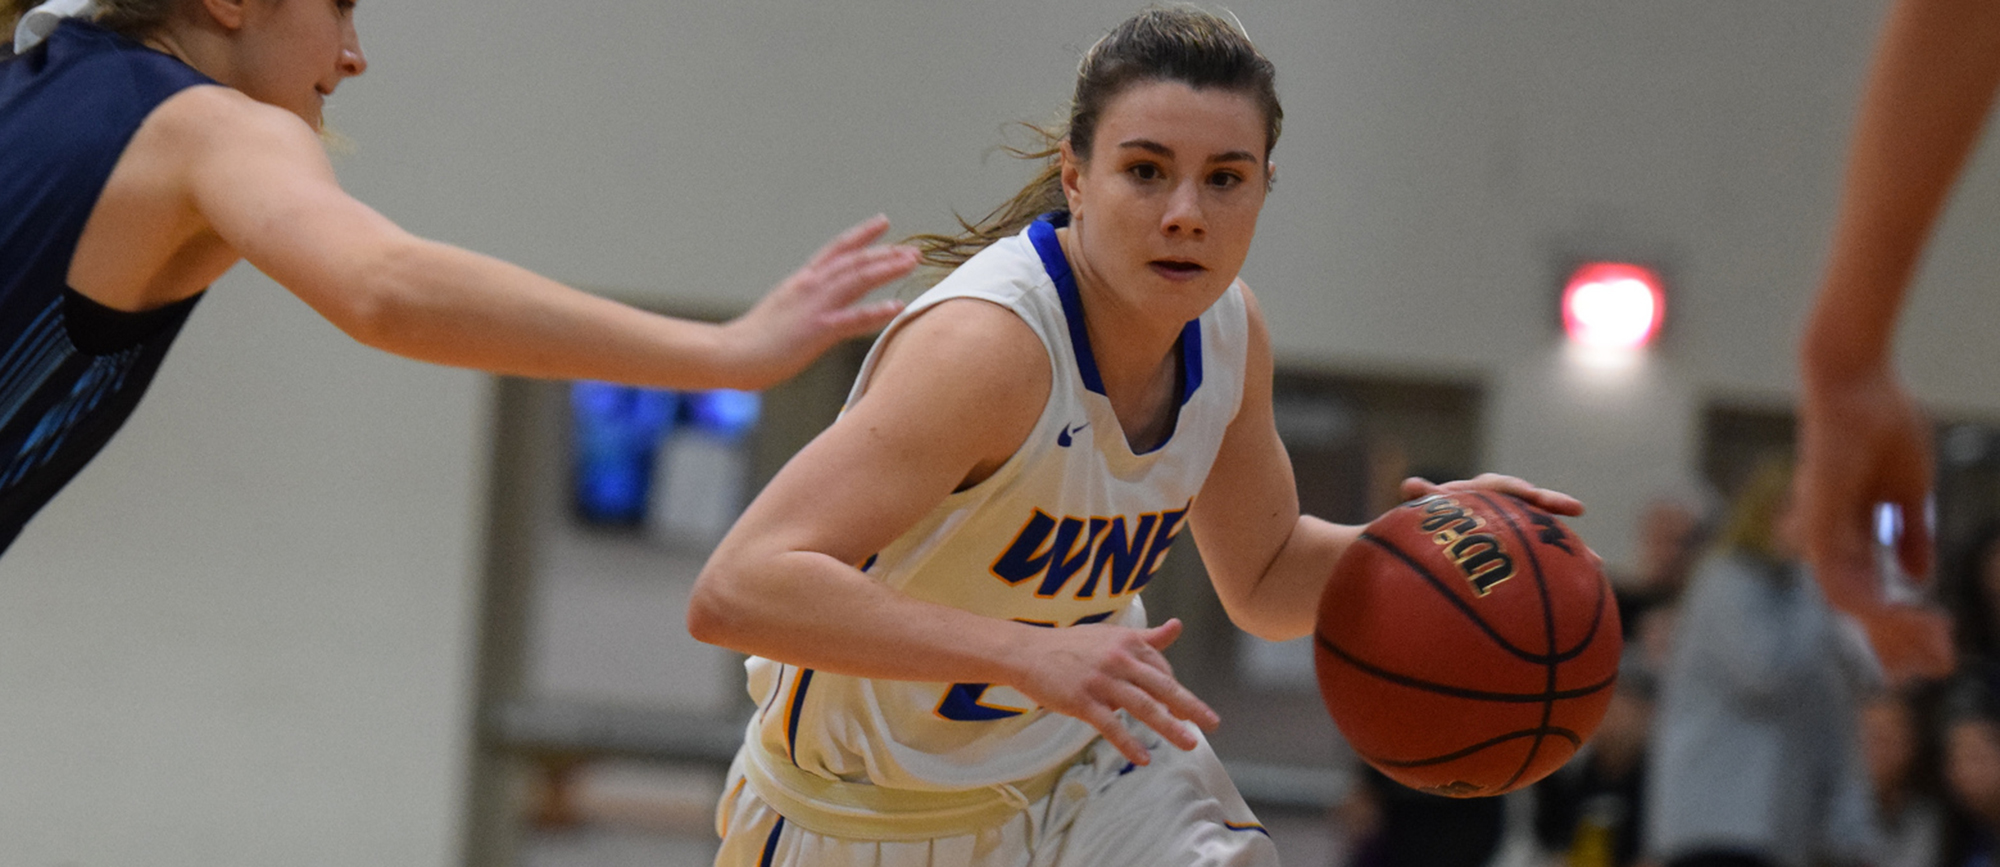 Junior Emily Farrell recorded a game-high 16 points, 4 assists, 3 rebounds and 3 steals as Western New England won its regular season finale at Roger Williams on Saturday. (Photo by Rachael Margossian)